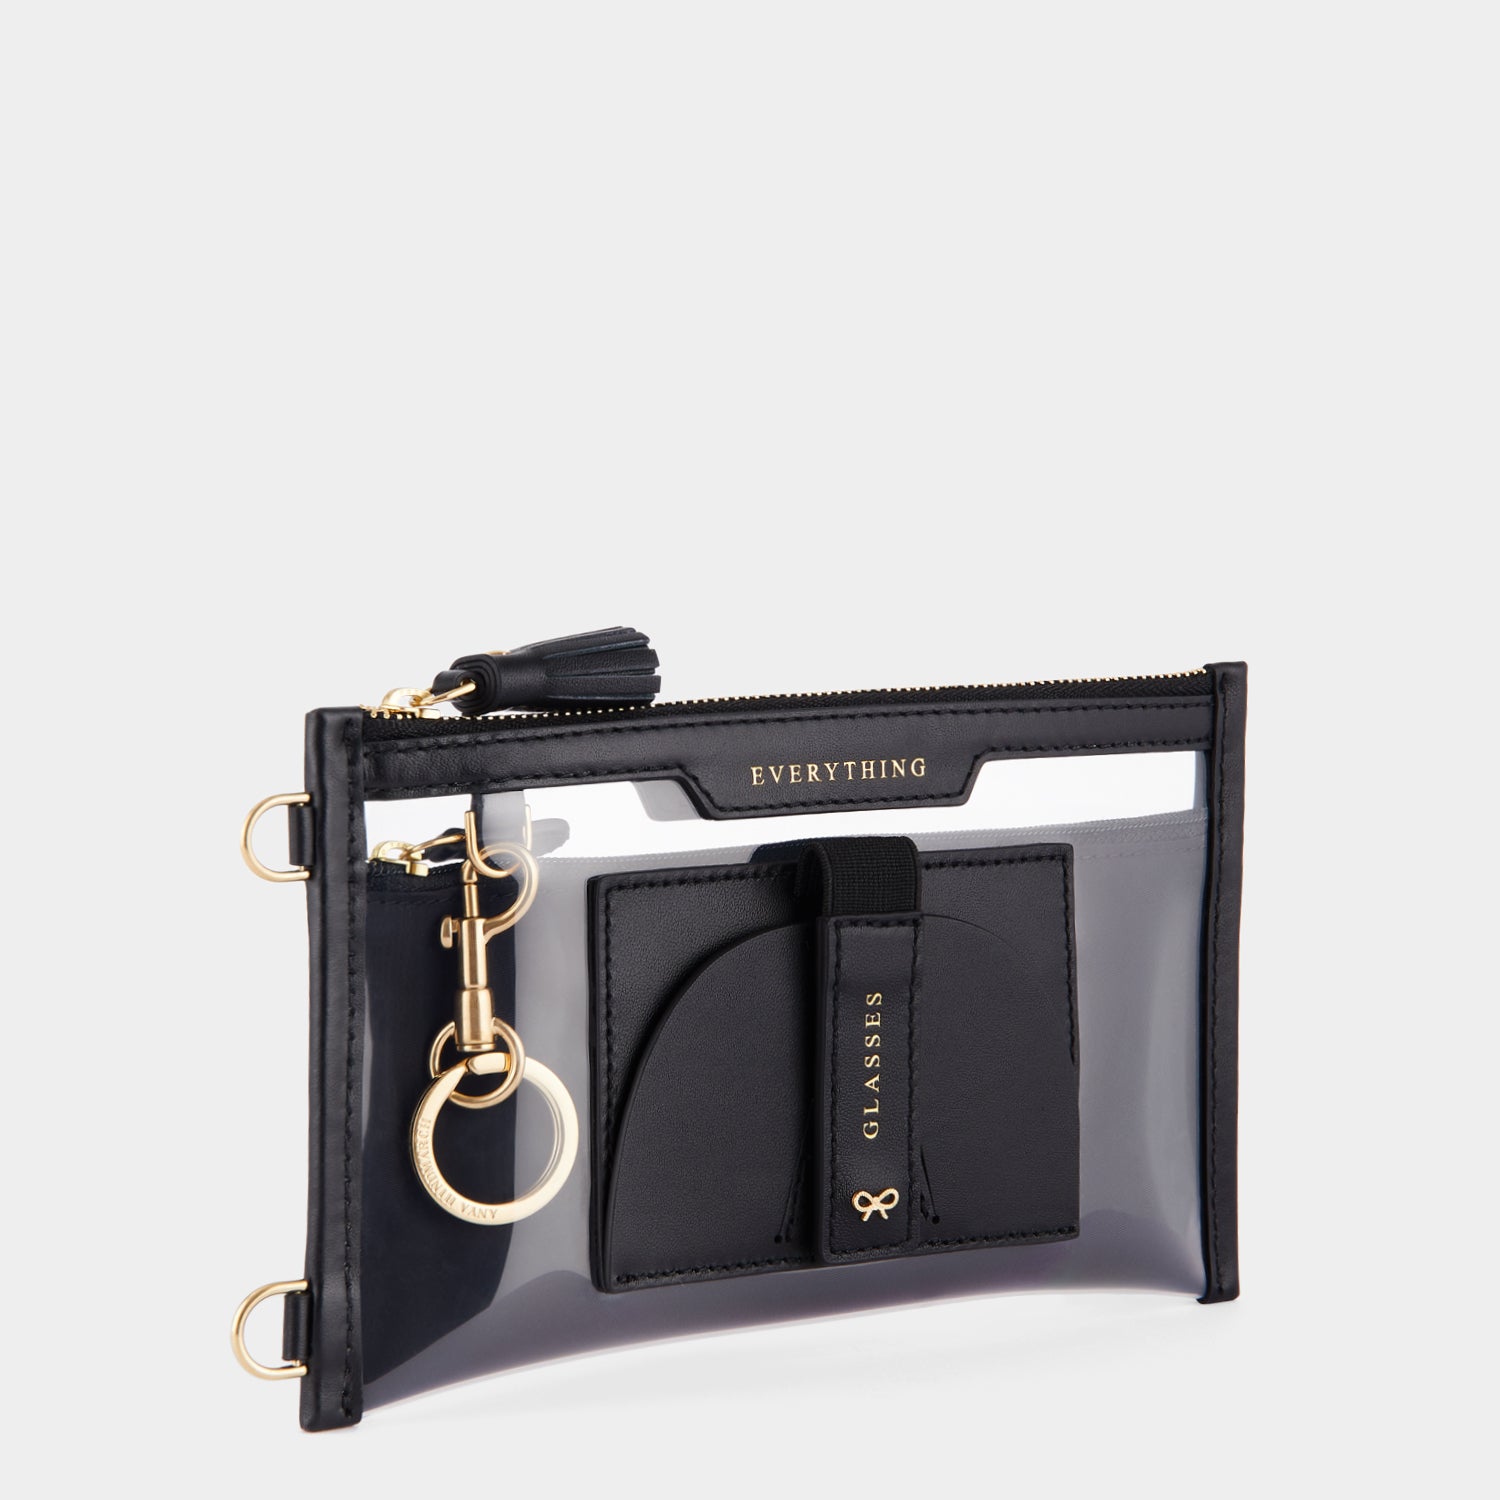 ANYA HINDMARCH 　Everything Pouch